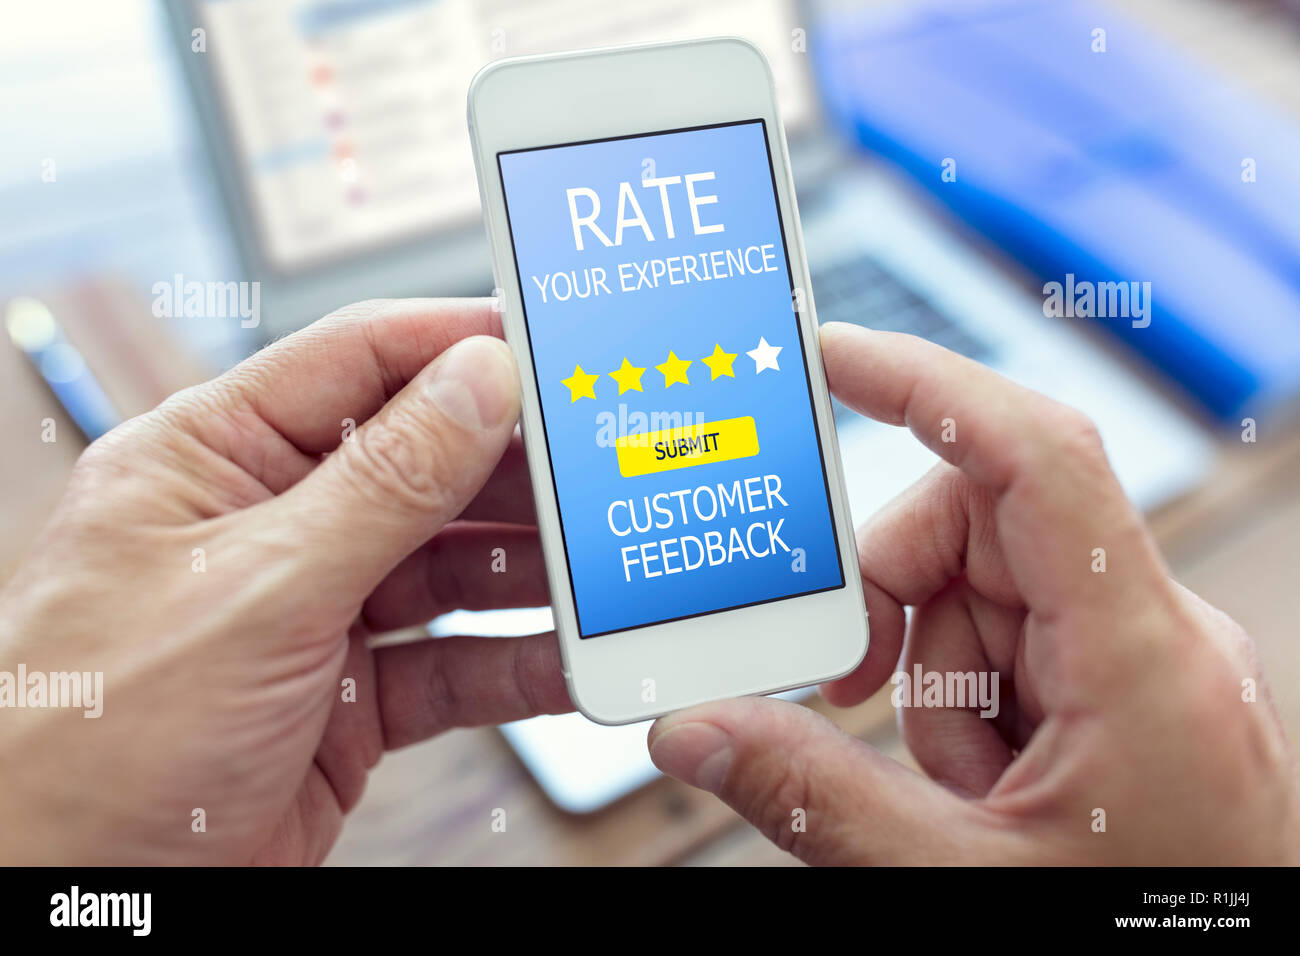 Customer feedback form rate you experience star rating on mobile phone Stock Photo